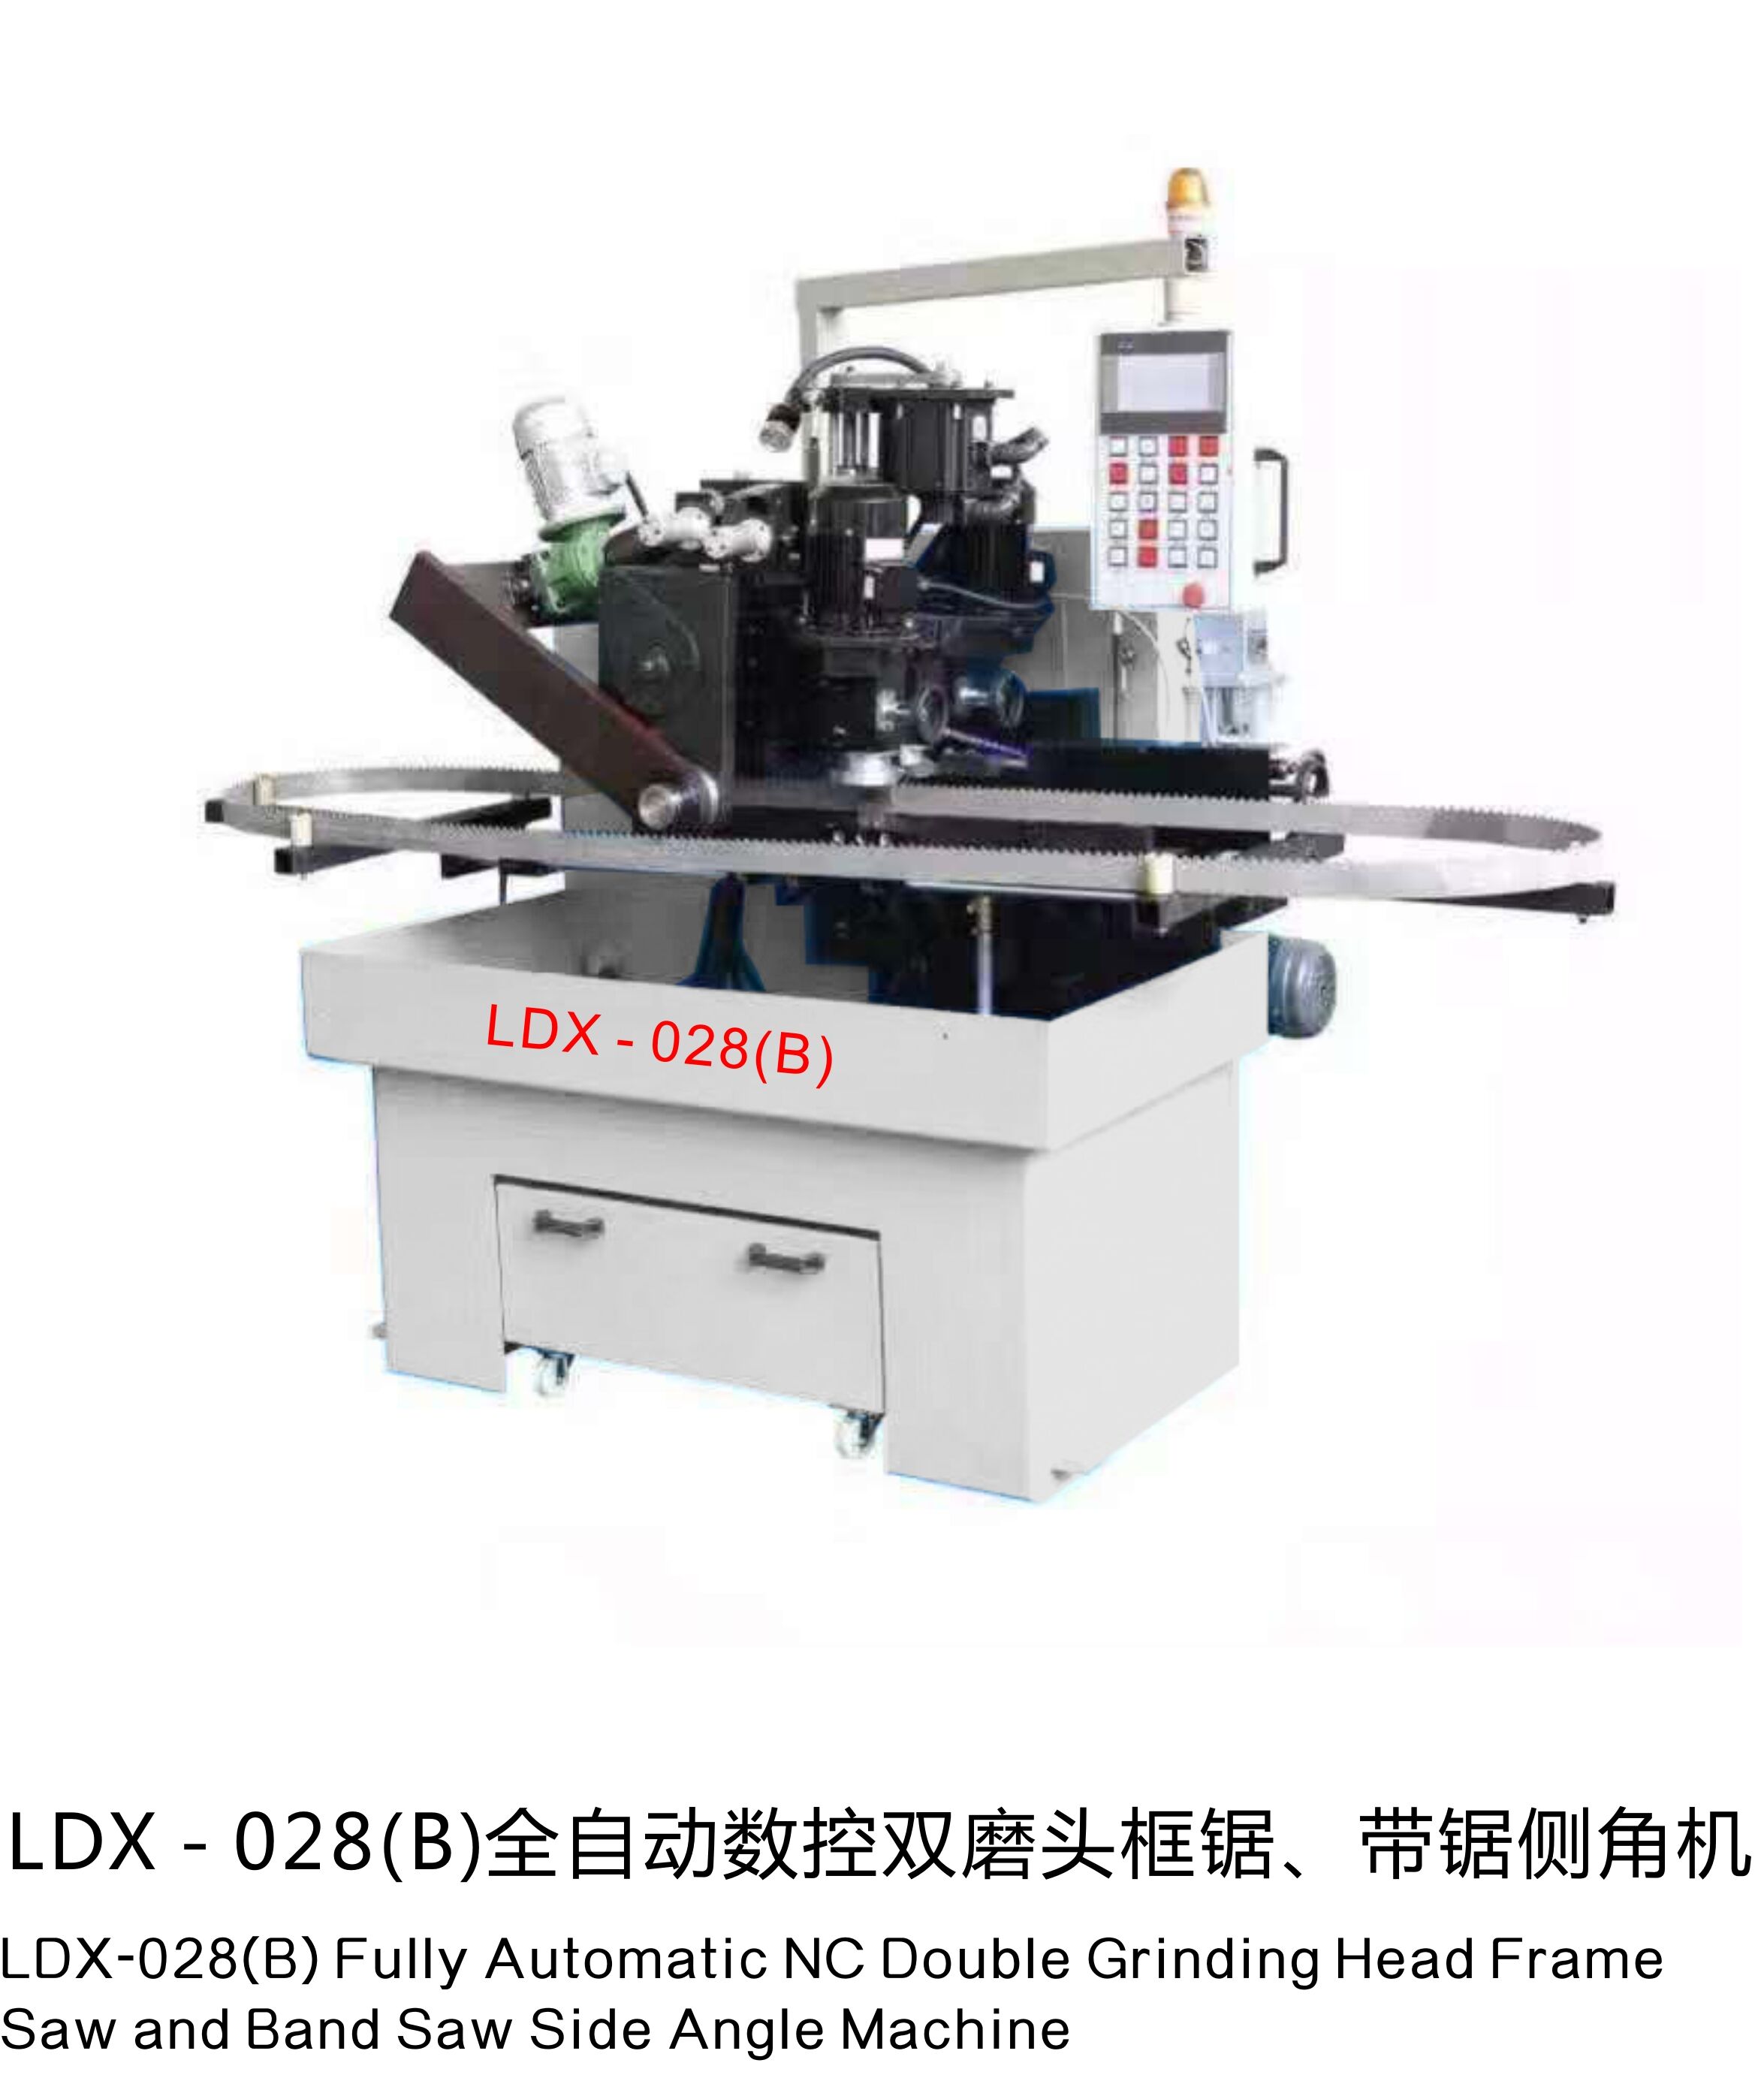 LDX-028(B)Fully automatic CNC double grinding head frame saw, band saw side angle machine